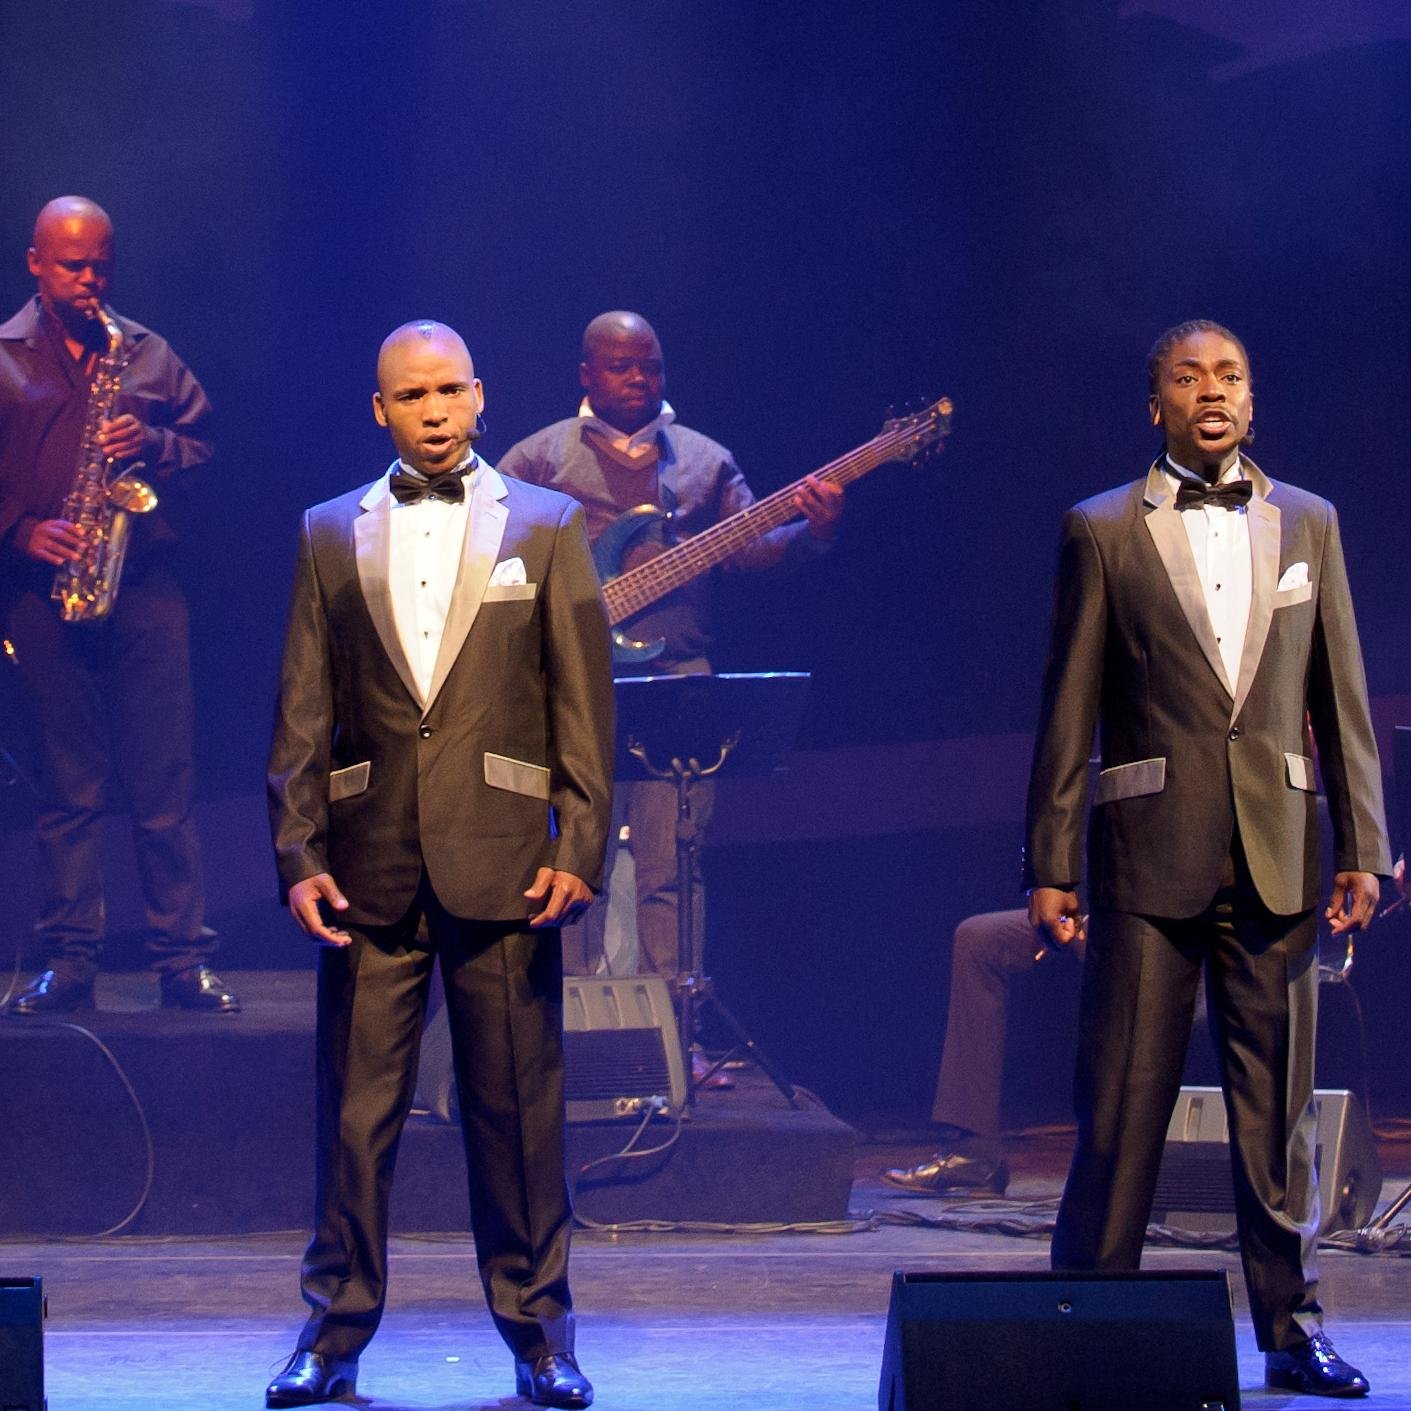 Soweto Afro-Pop Opera dubbed SA ILDivo, with a wider repertoire from Jazz Opera, Motown, World Music. For Bookings: info@vilentertainment.com